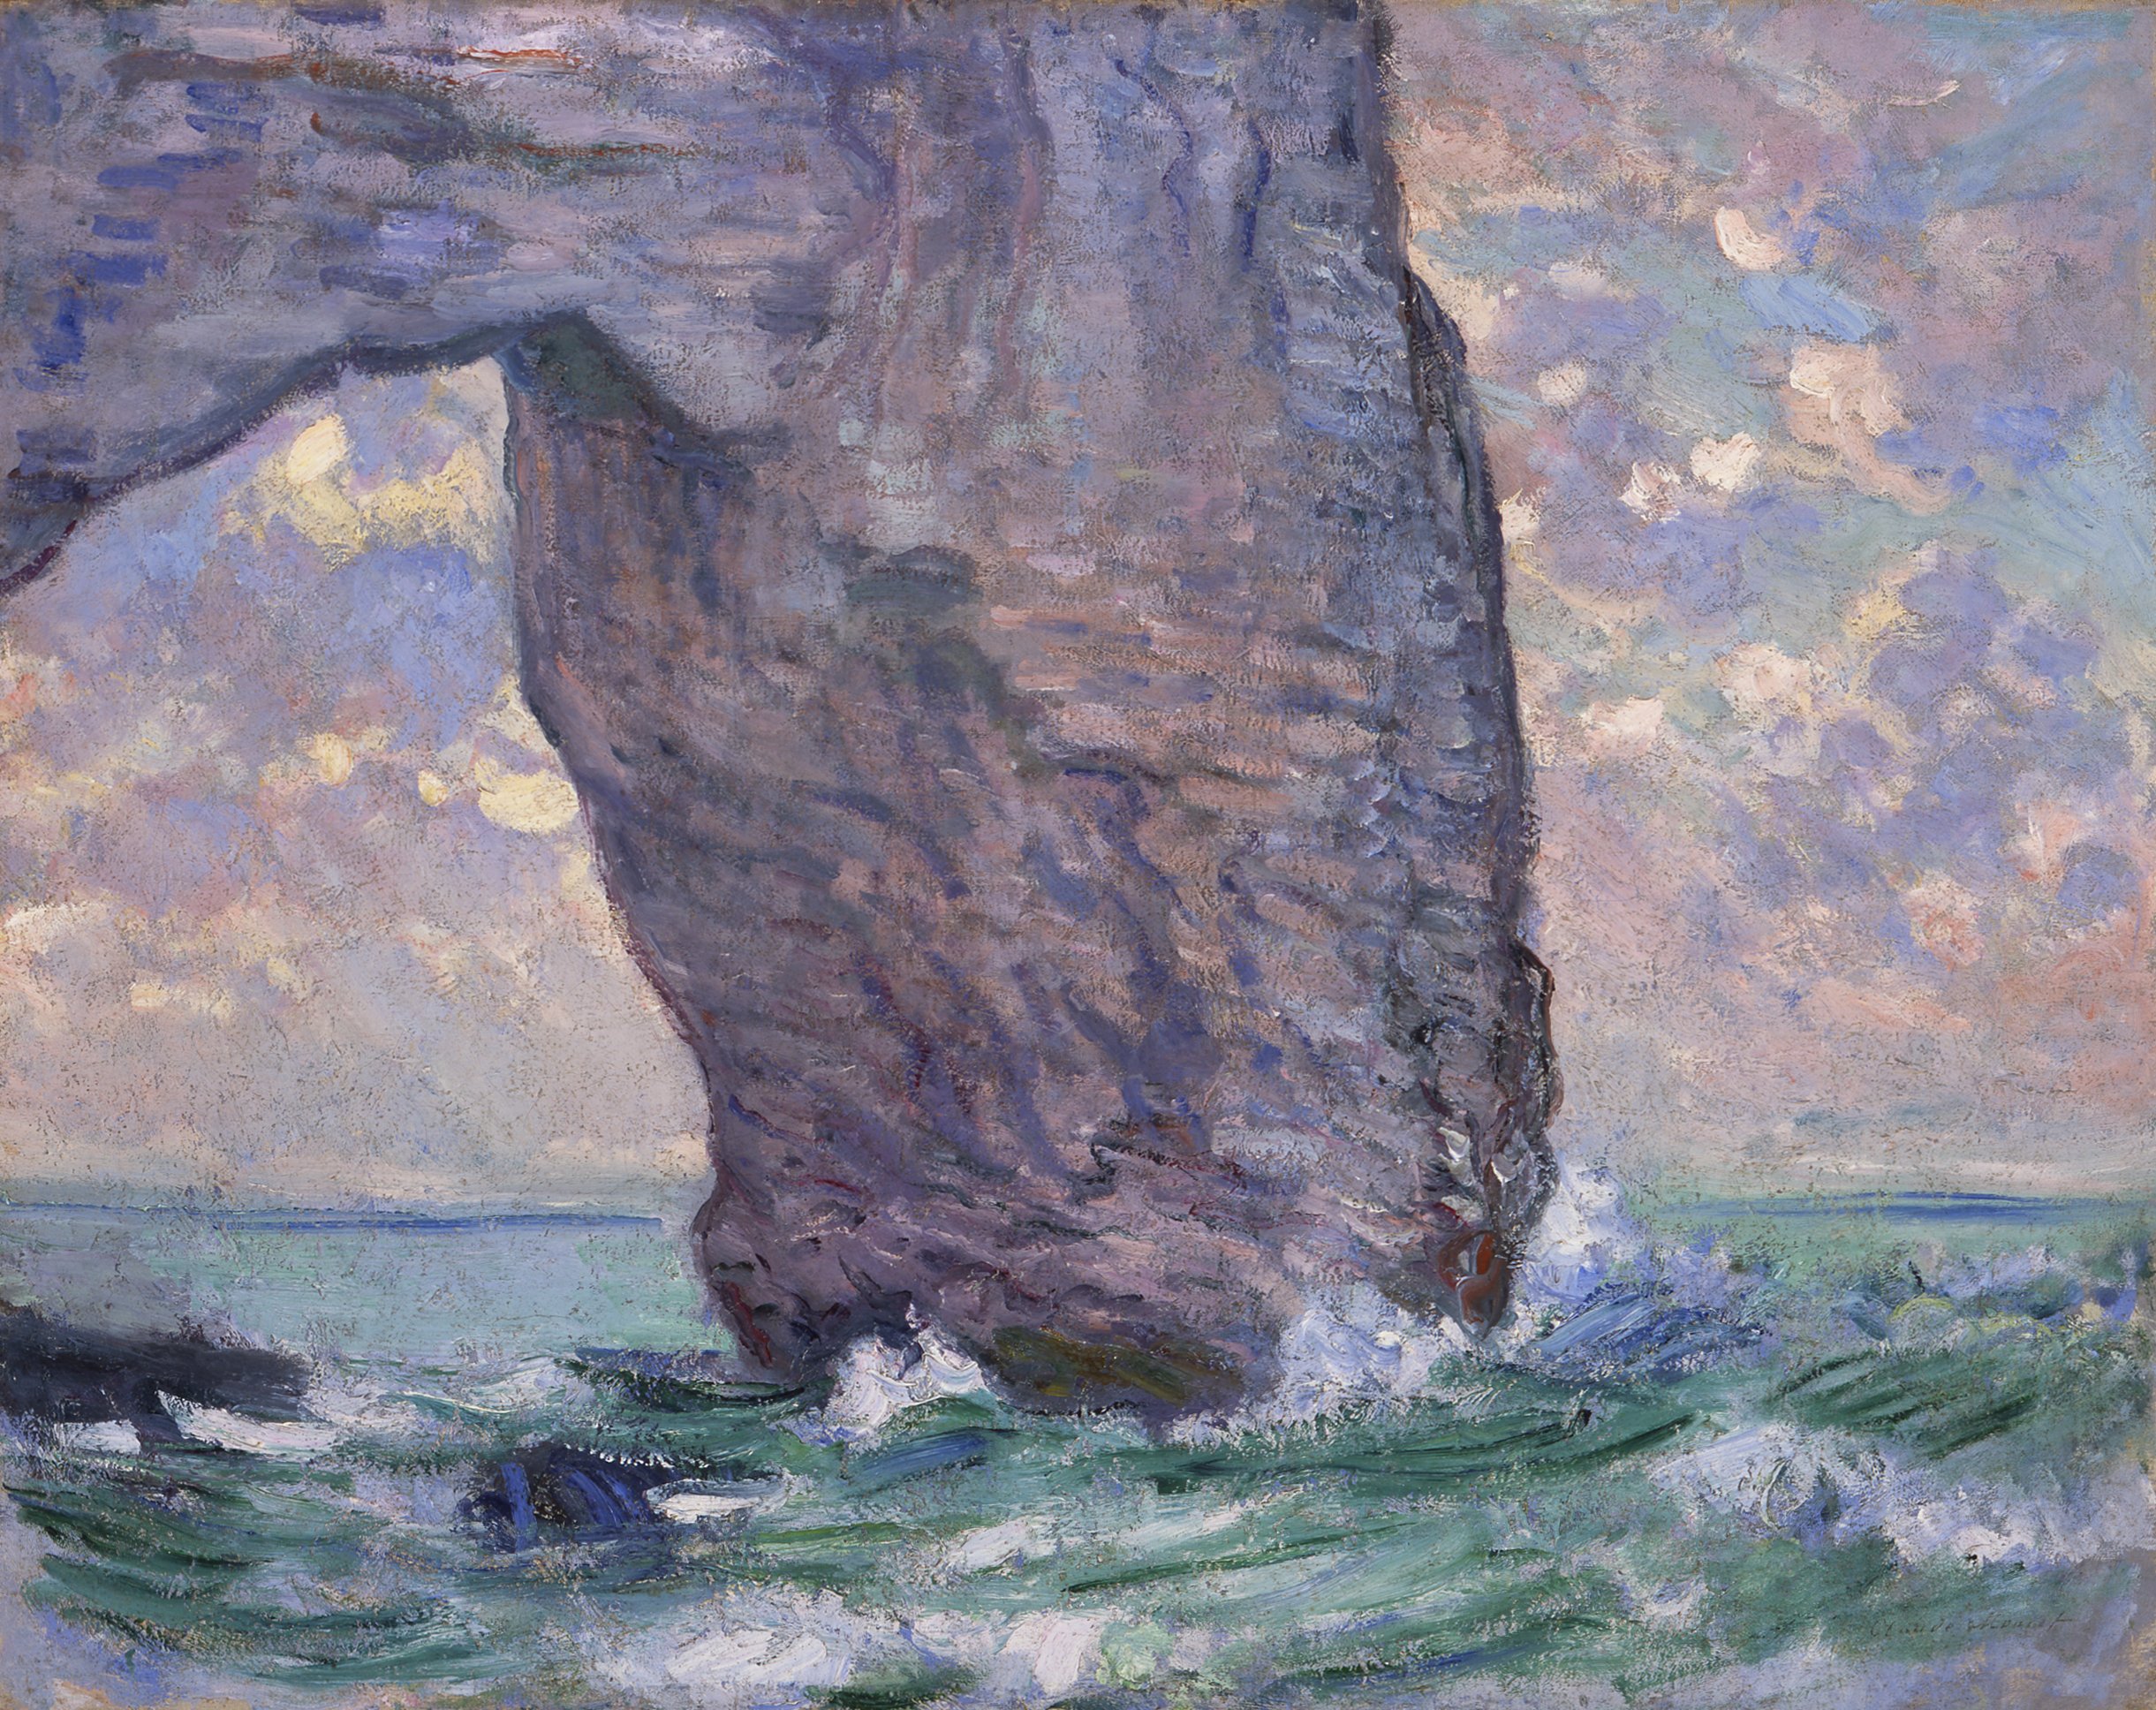  Claude Monet (France, 1840-1926),  The Manneporte Seen from Below , circa 1884, oil on canvas, 28 3/4 x 36 5/16 inches. Isabelle and Scott Black Collection. Image courtesy of Meyersphoto.com⁠ 